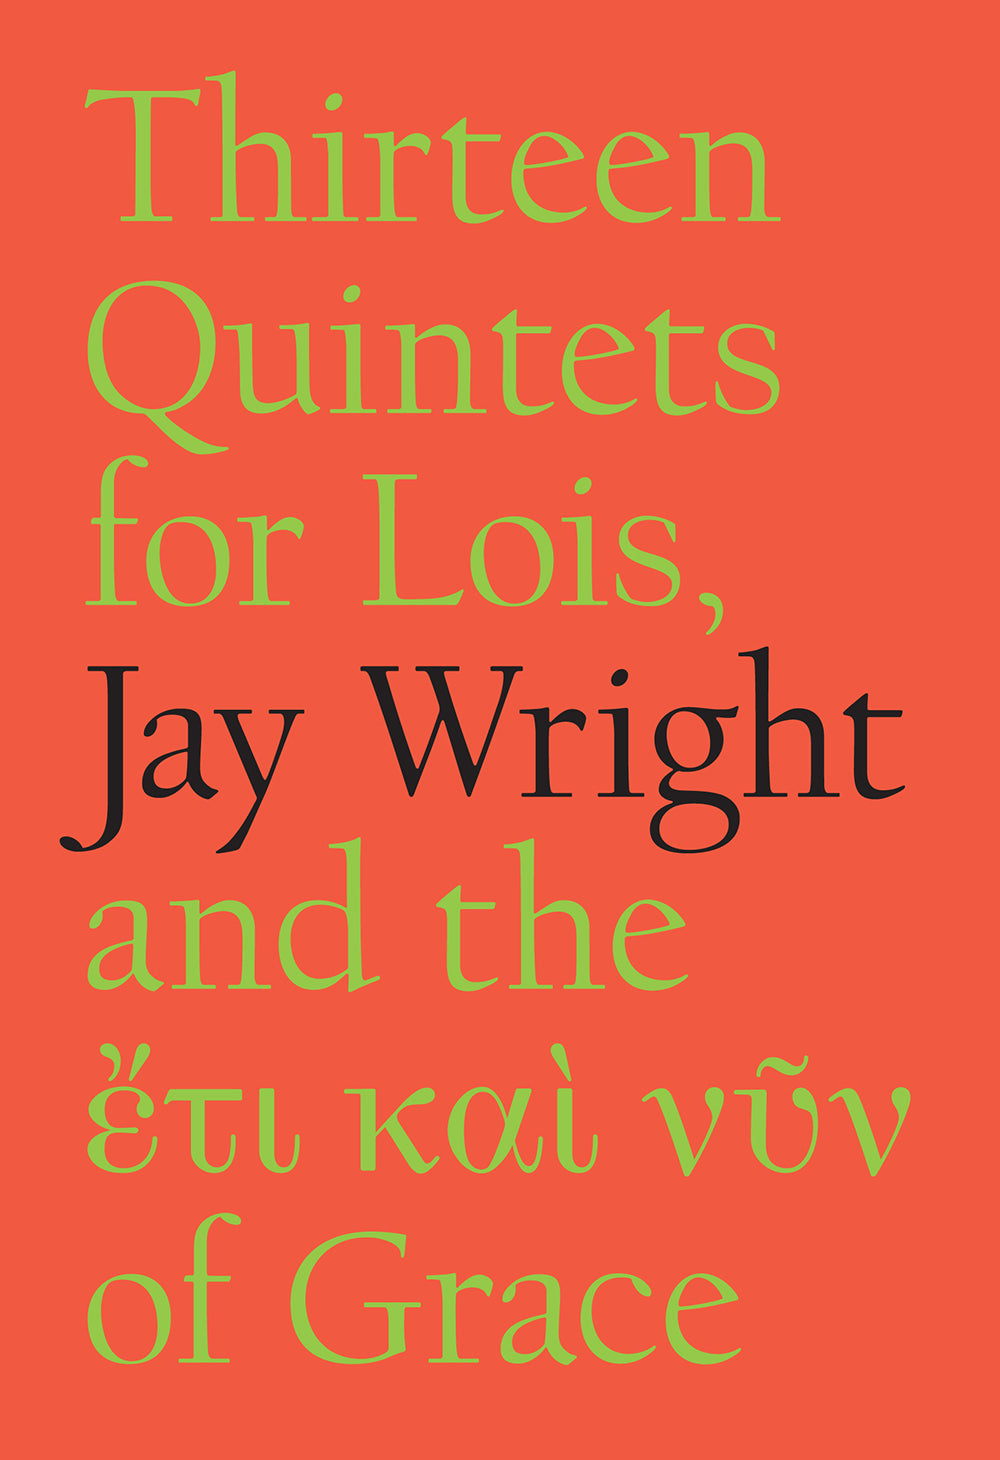 Wright, Jay: Thirteen Quintets for Lois, and the ἔτι καὶ νῦν of Grace by Jay Wright